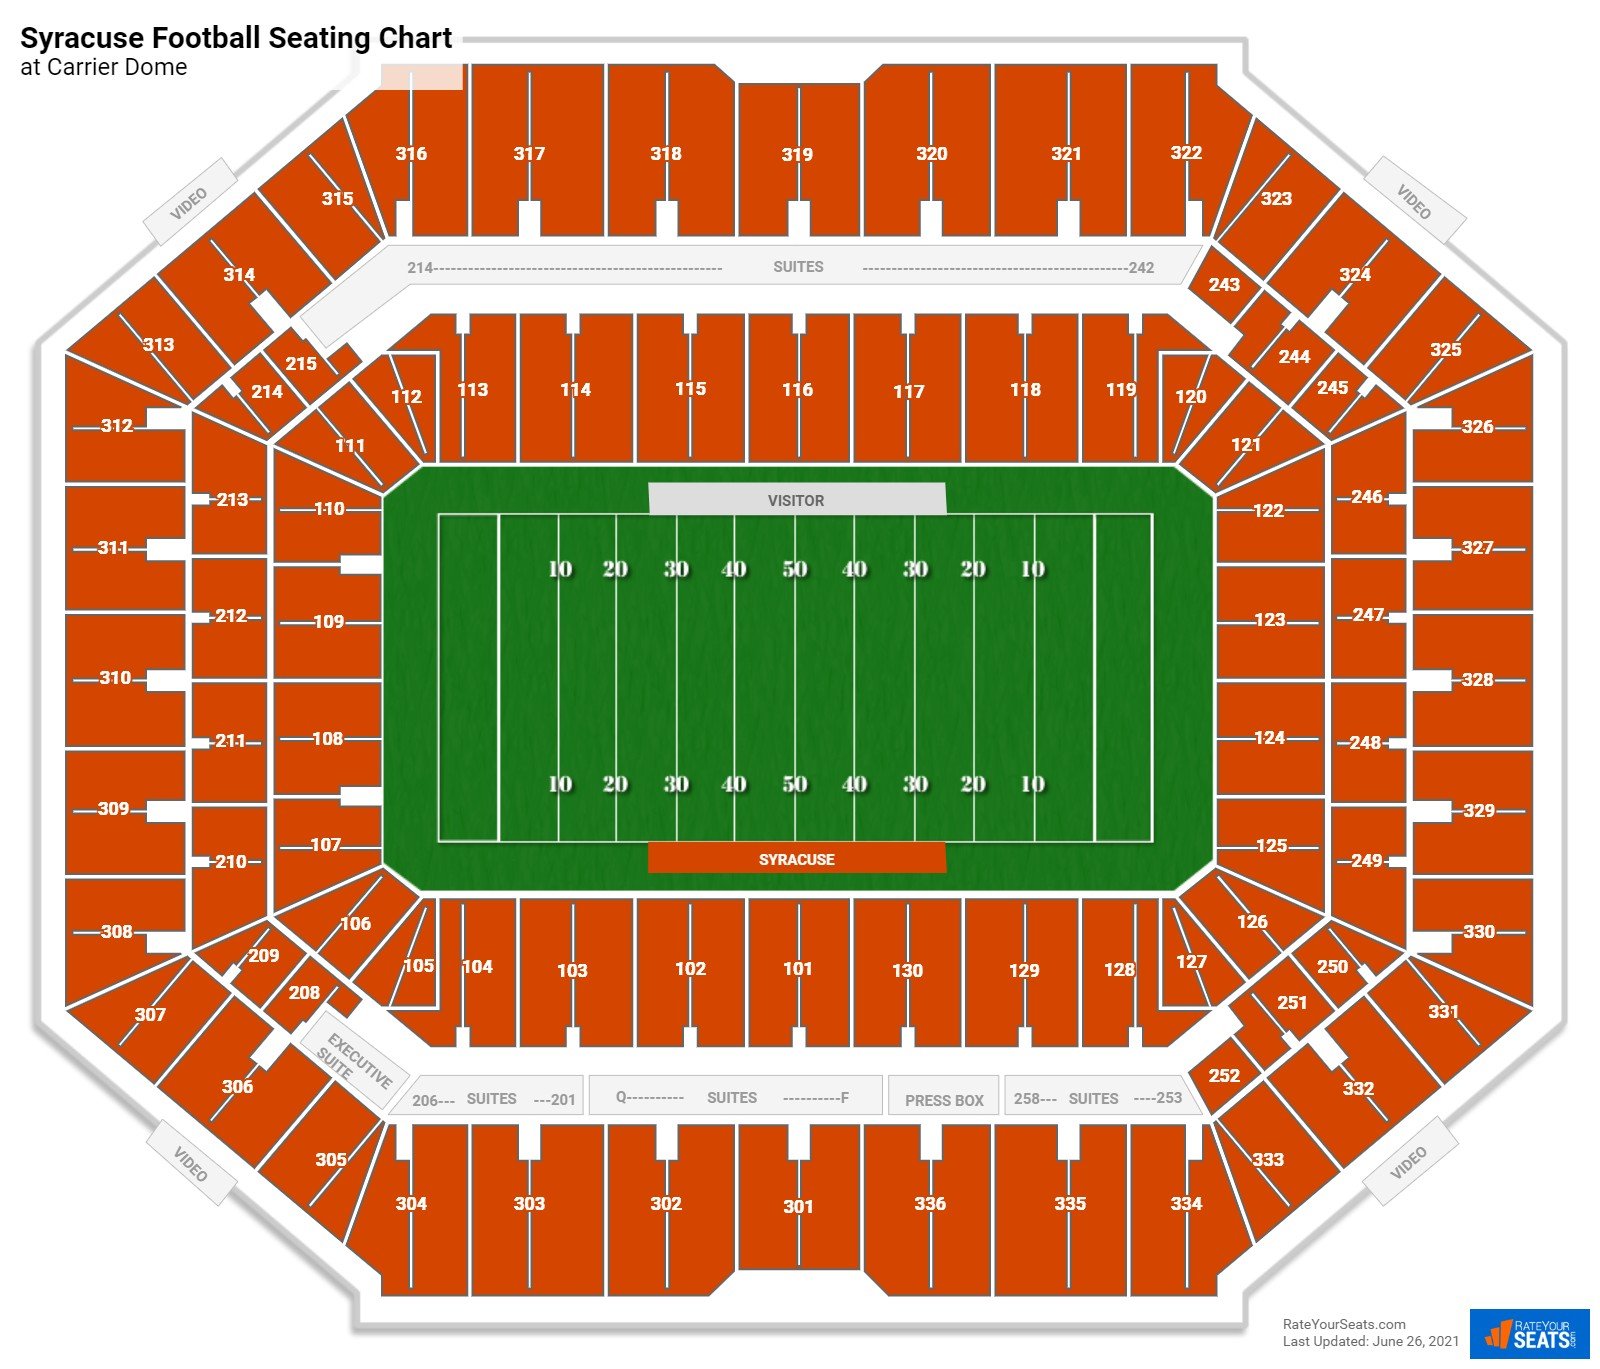 syracuse-football-seating-chart-at-carrier-dome.jpg